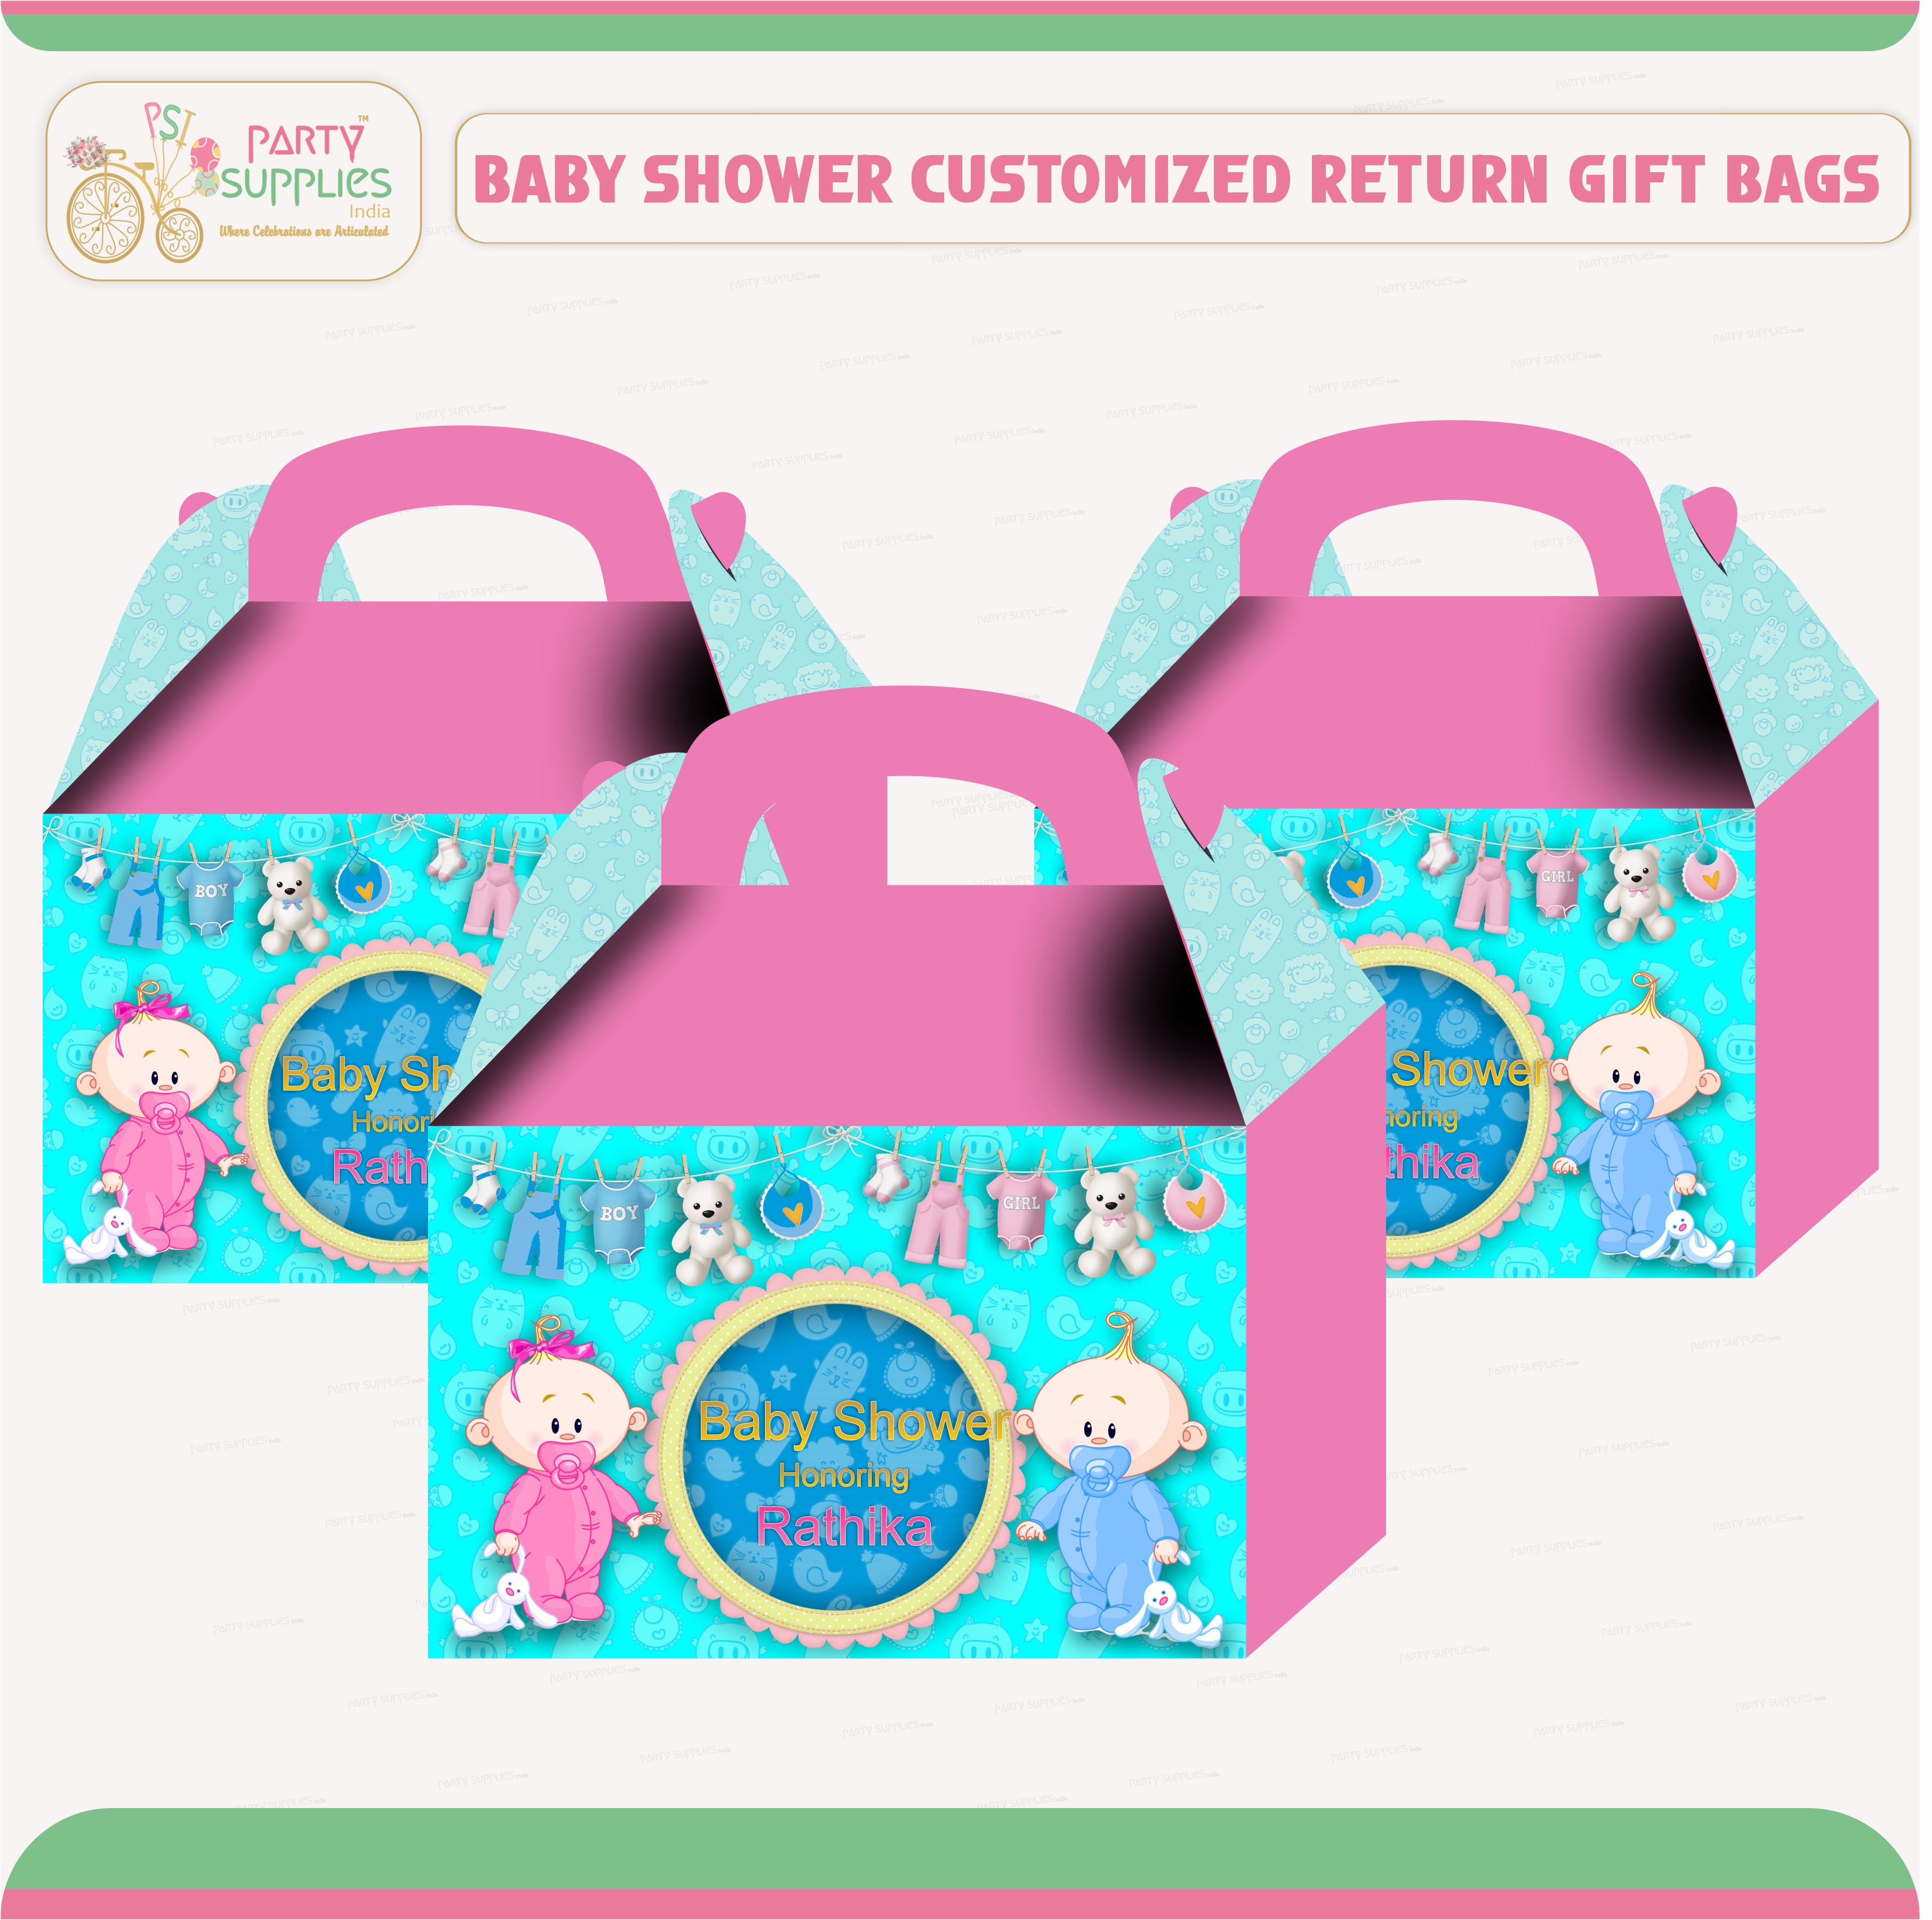 Baby Shower Gifts For Mom Not Baby In India | Gifts For Baby Shower